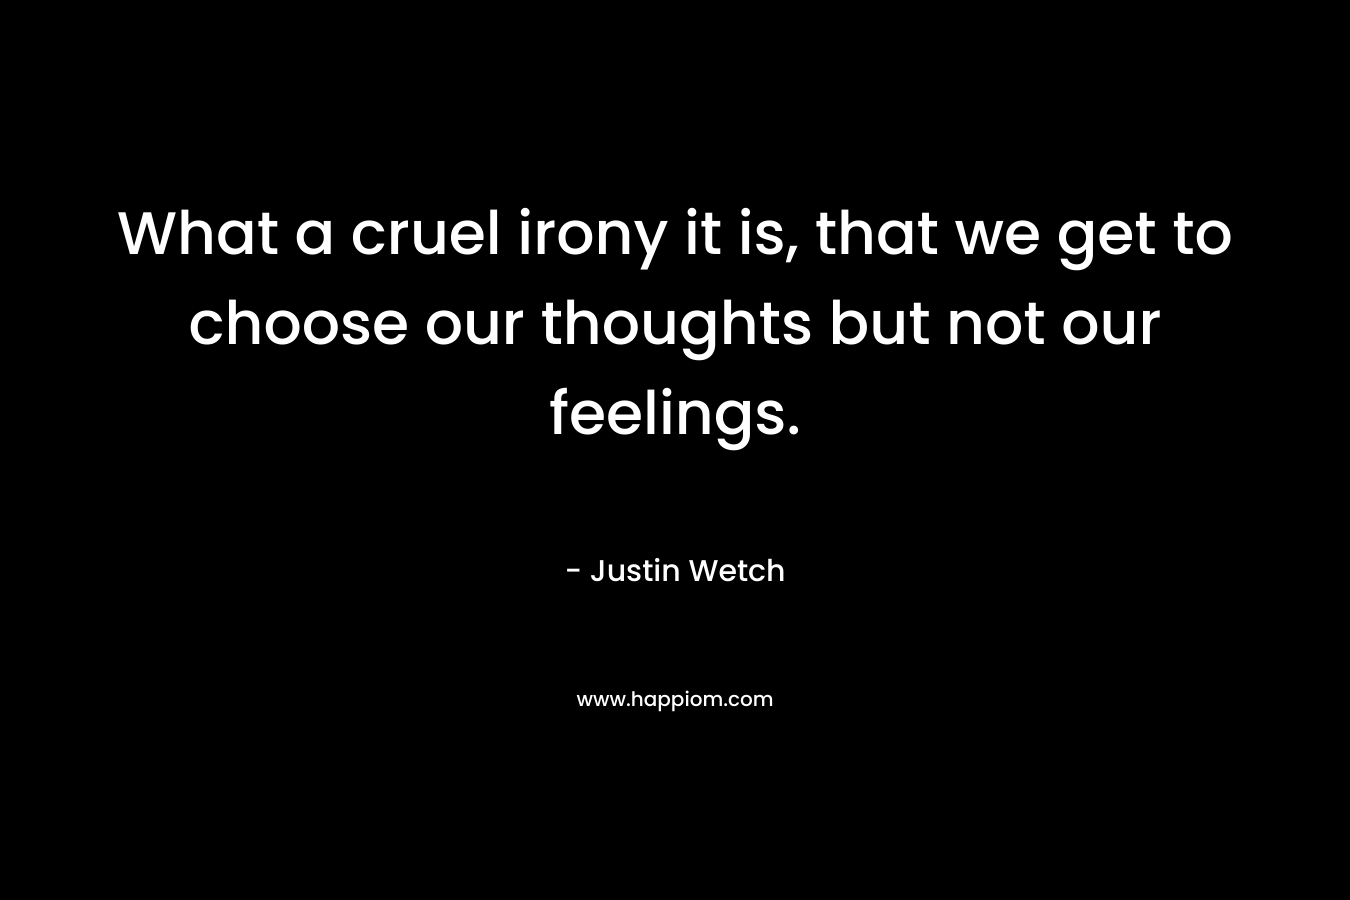 What a cruel irony it is, that we get to choose our thoughts but not our feelings. – Justin Wetch